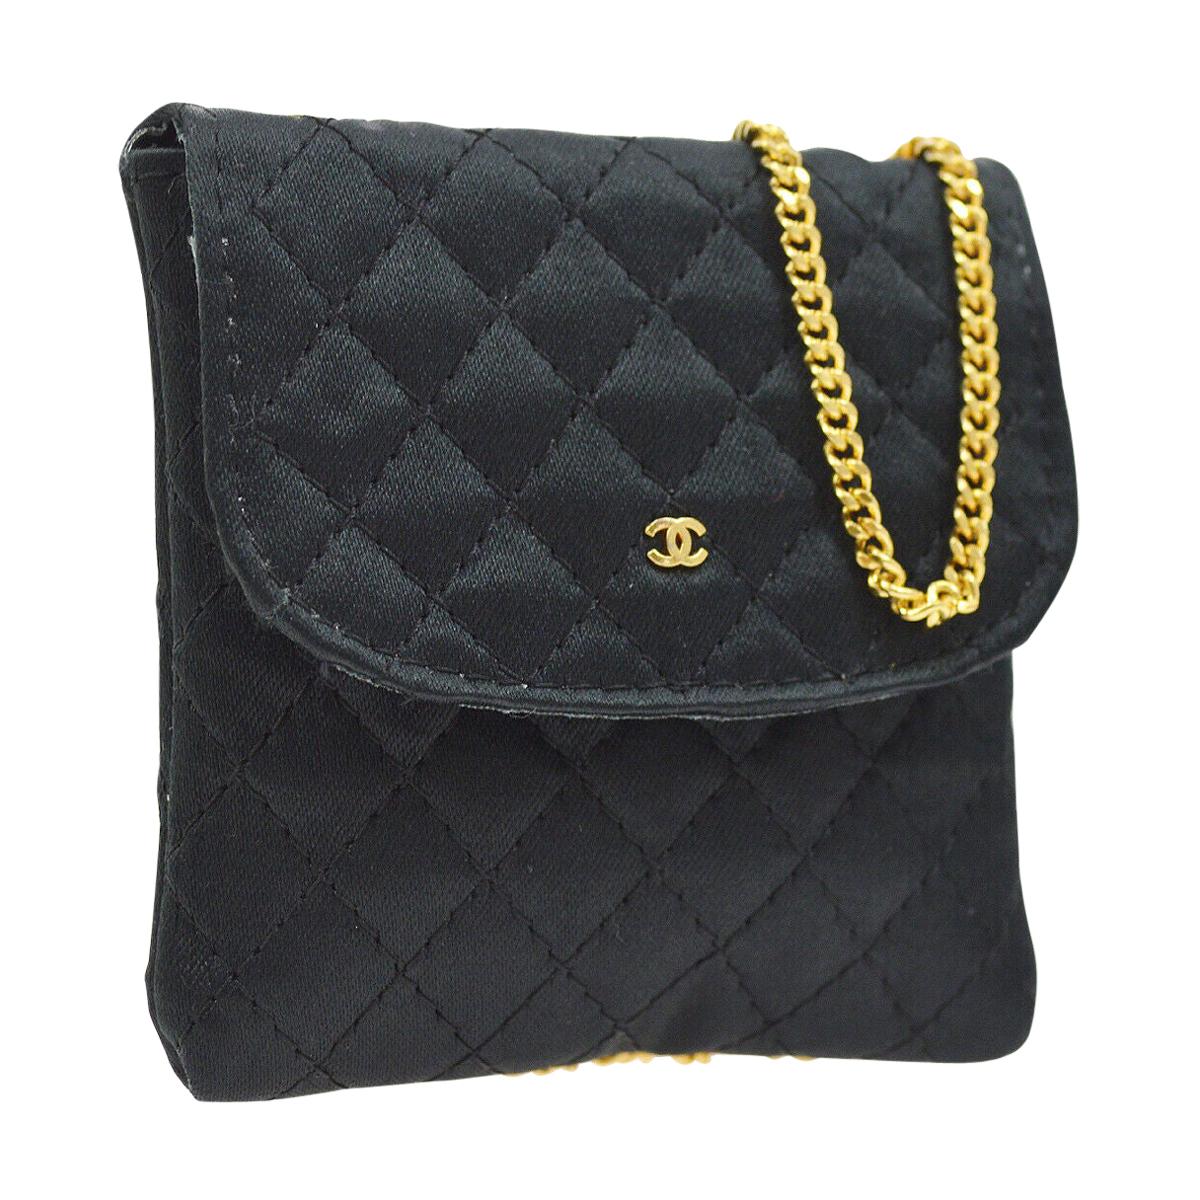 Chanel Vintage Satin Mini Small Micro Evening Pouch Gold Shoulder Flap Bag